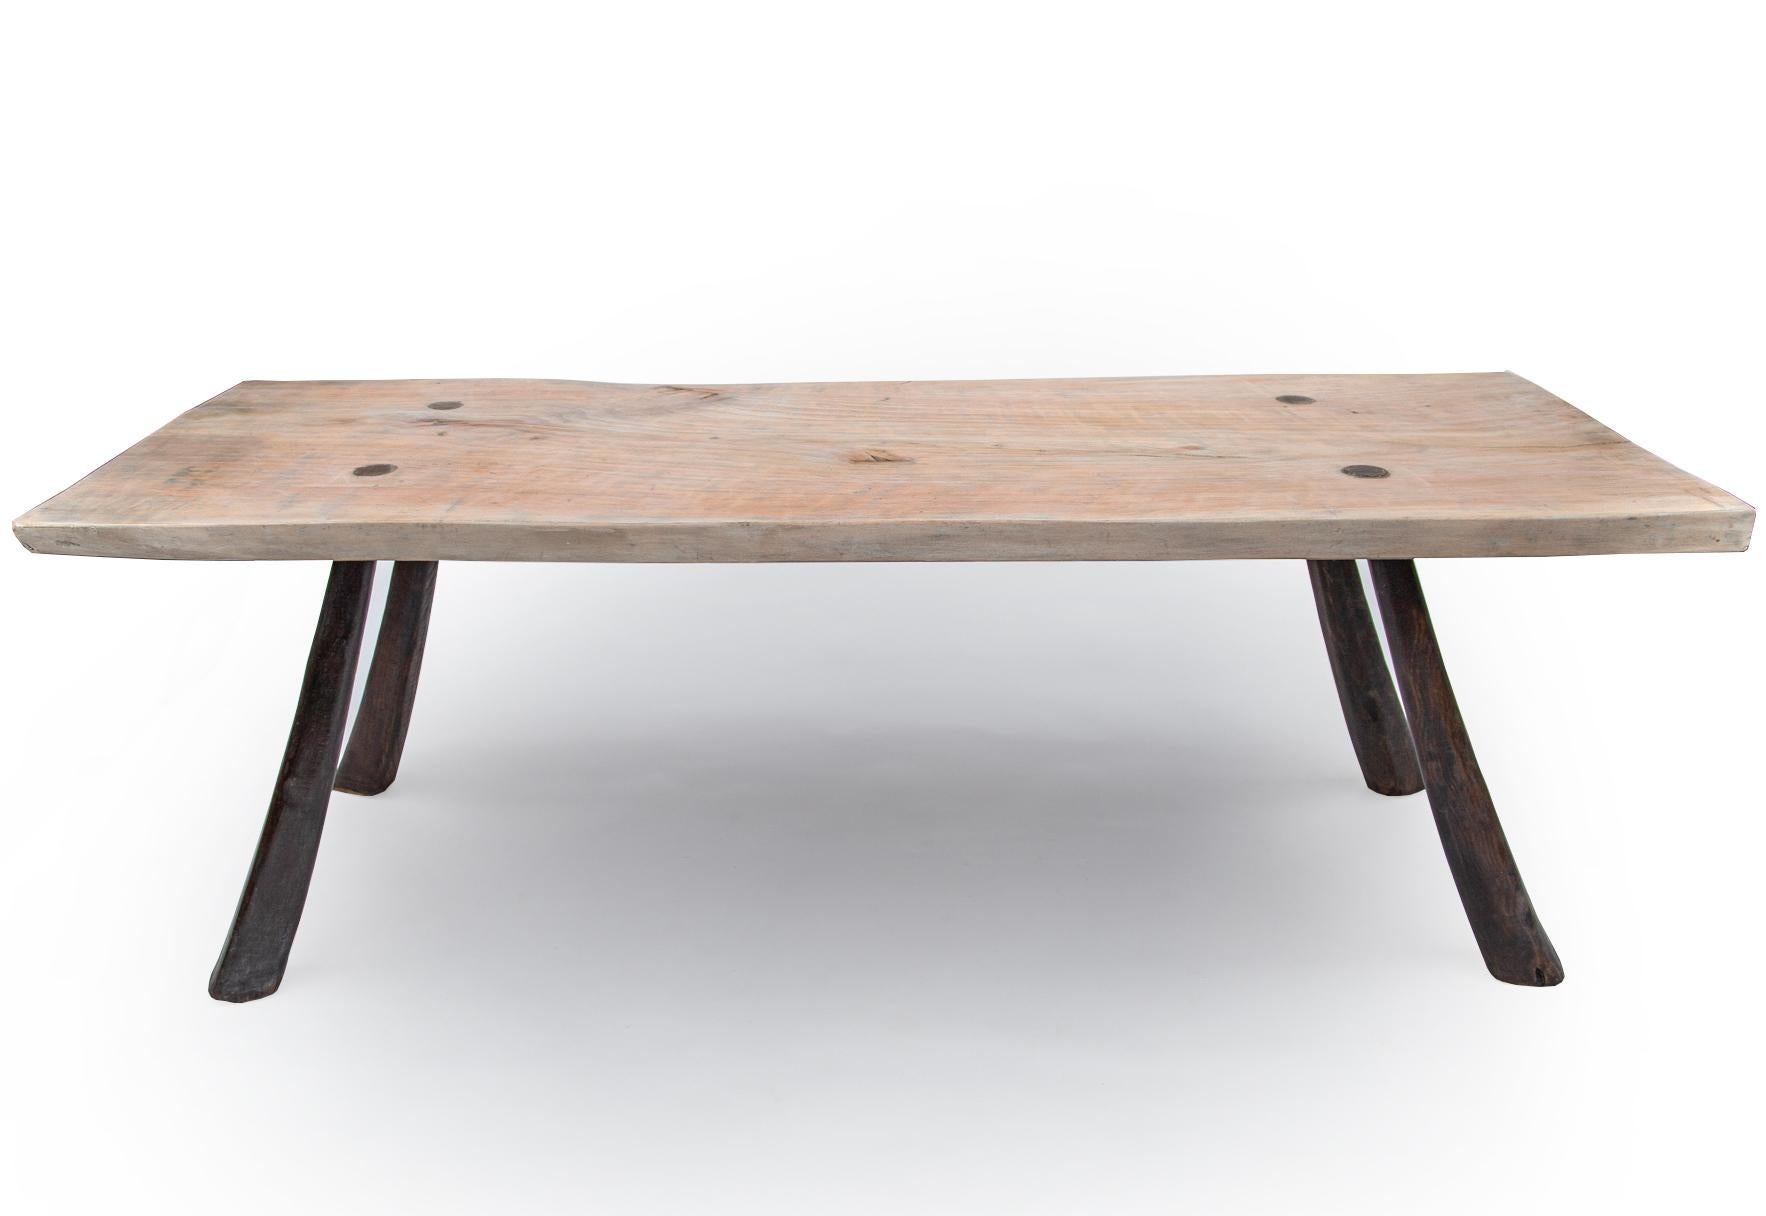 Mallorca, first quarter of the 20th century

The table top crafted from a single plank of olive wood. Each leg chosen with a natural organic splay in the wood movement. Beautifully handcrafted using traditional wedge dowel joining methods and of